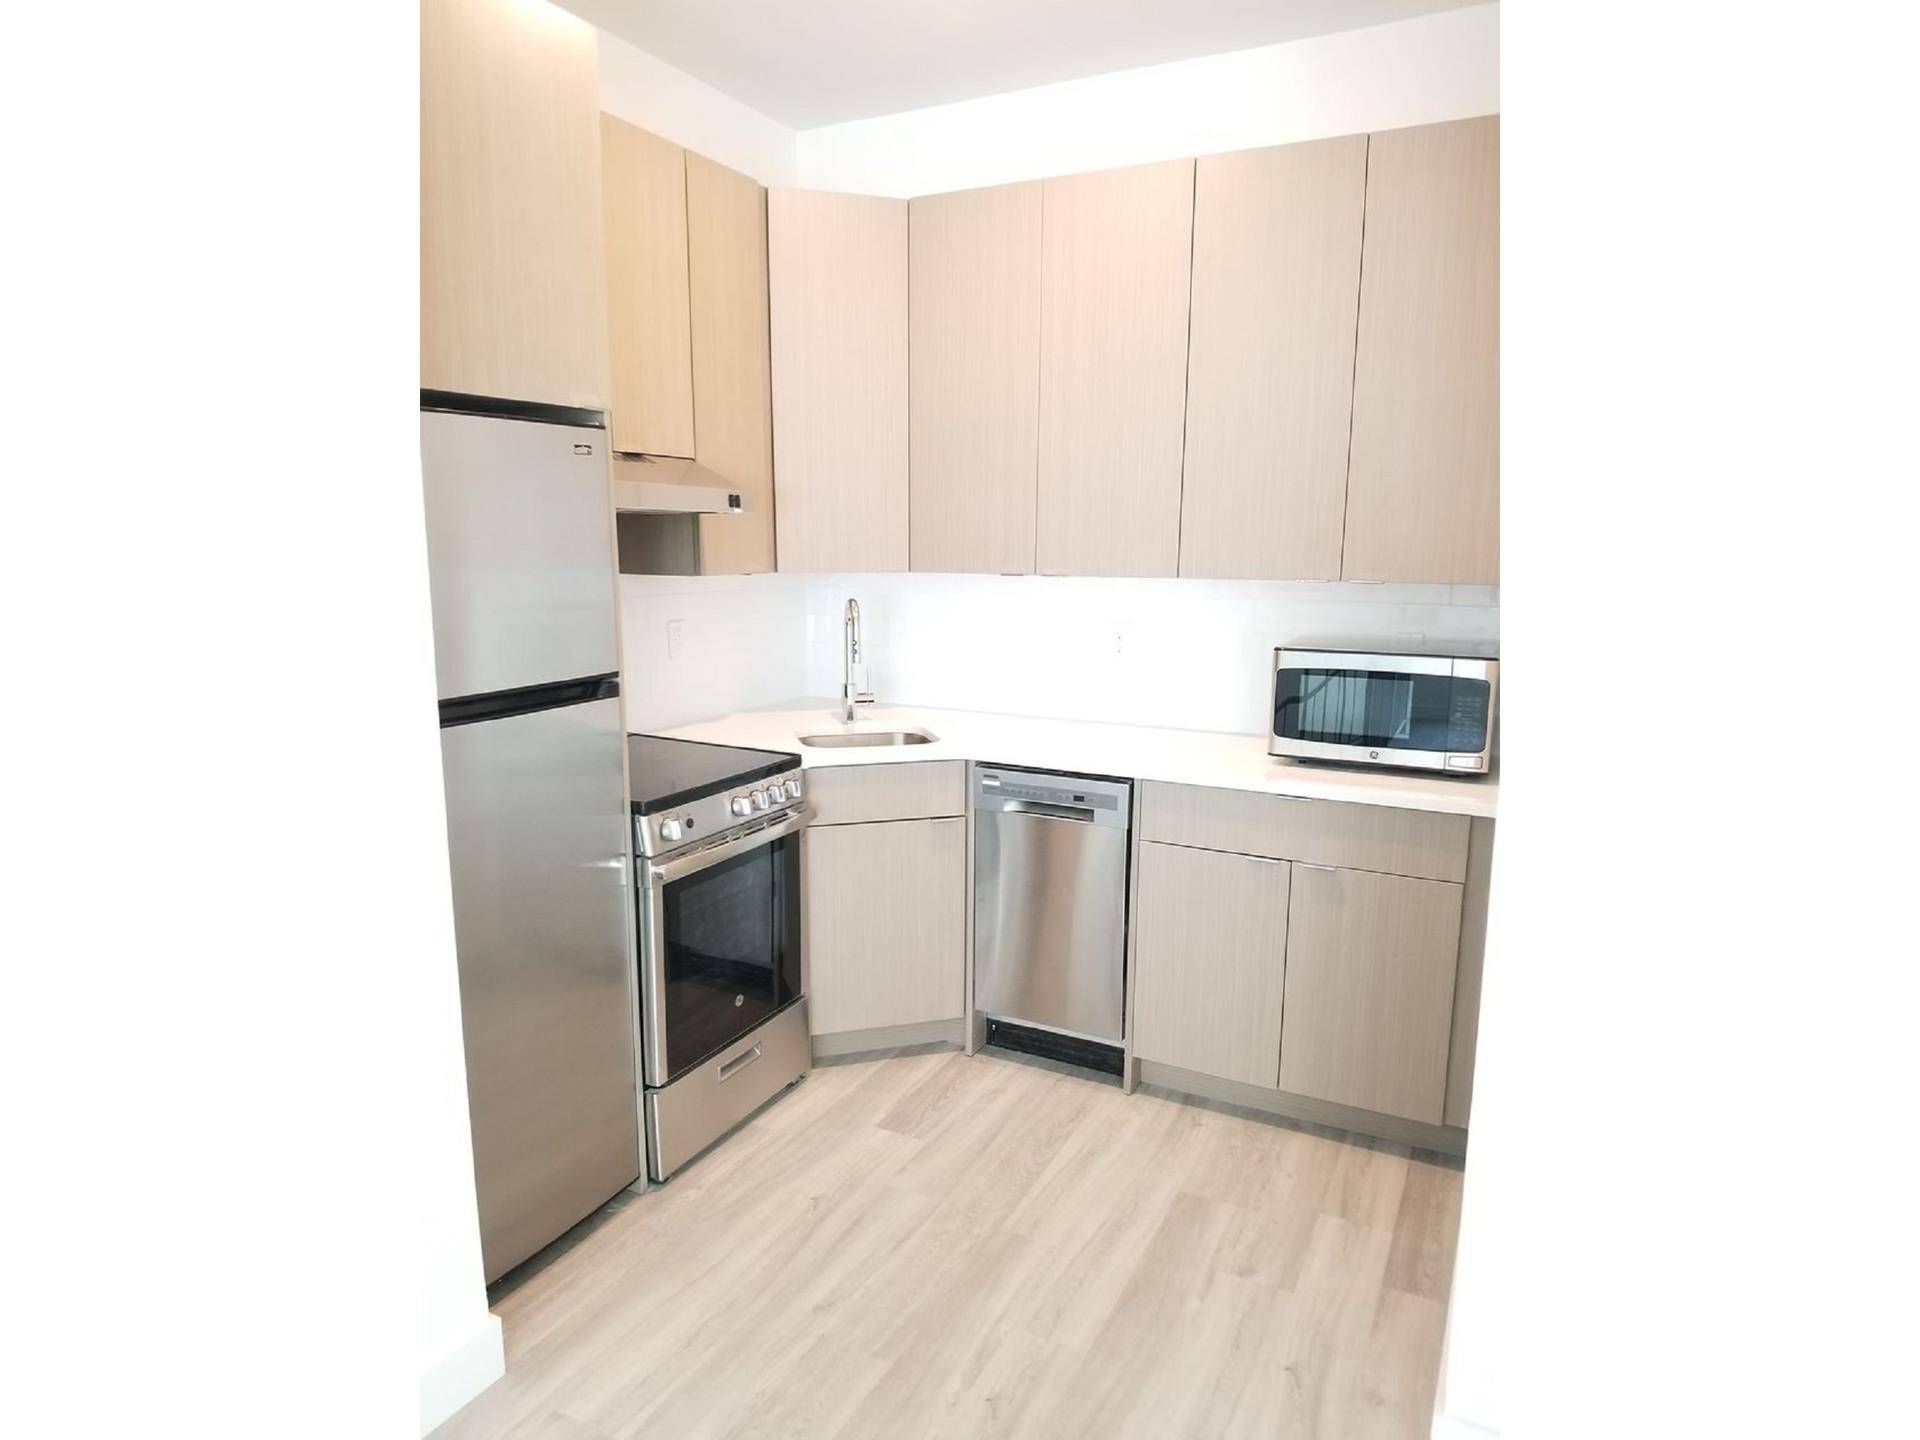 SUNNY DUPLEX STUDIO WITH SOUTHERN EXPOSURE Now is your opportunity to live in a pristine, brand new building.